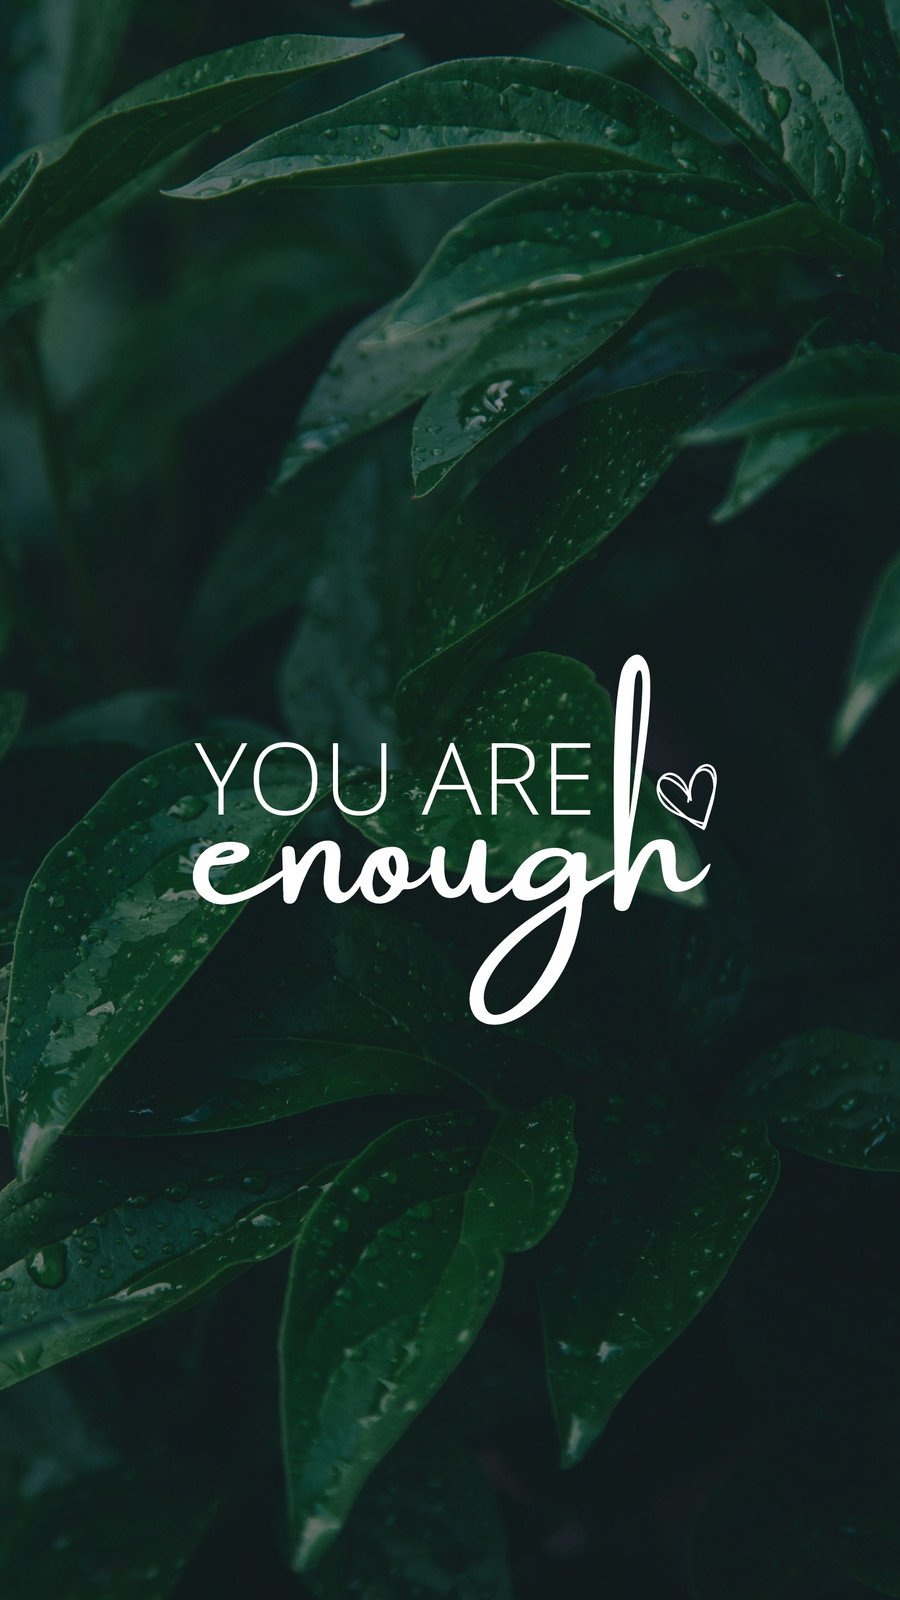 Wallpaper beyou not them | Quote aesthetic, Beautiful quotes, Wallpaper  quotes